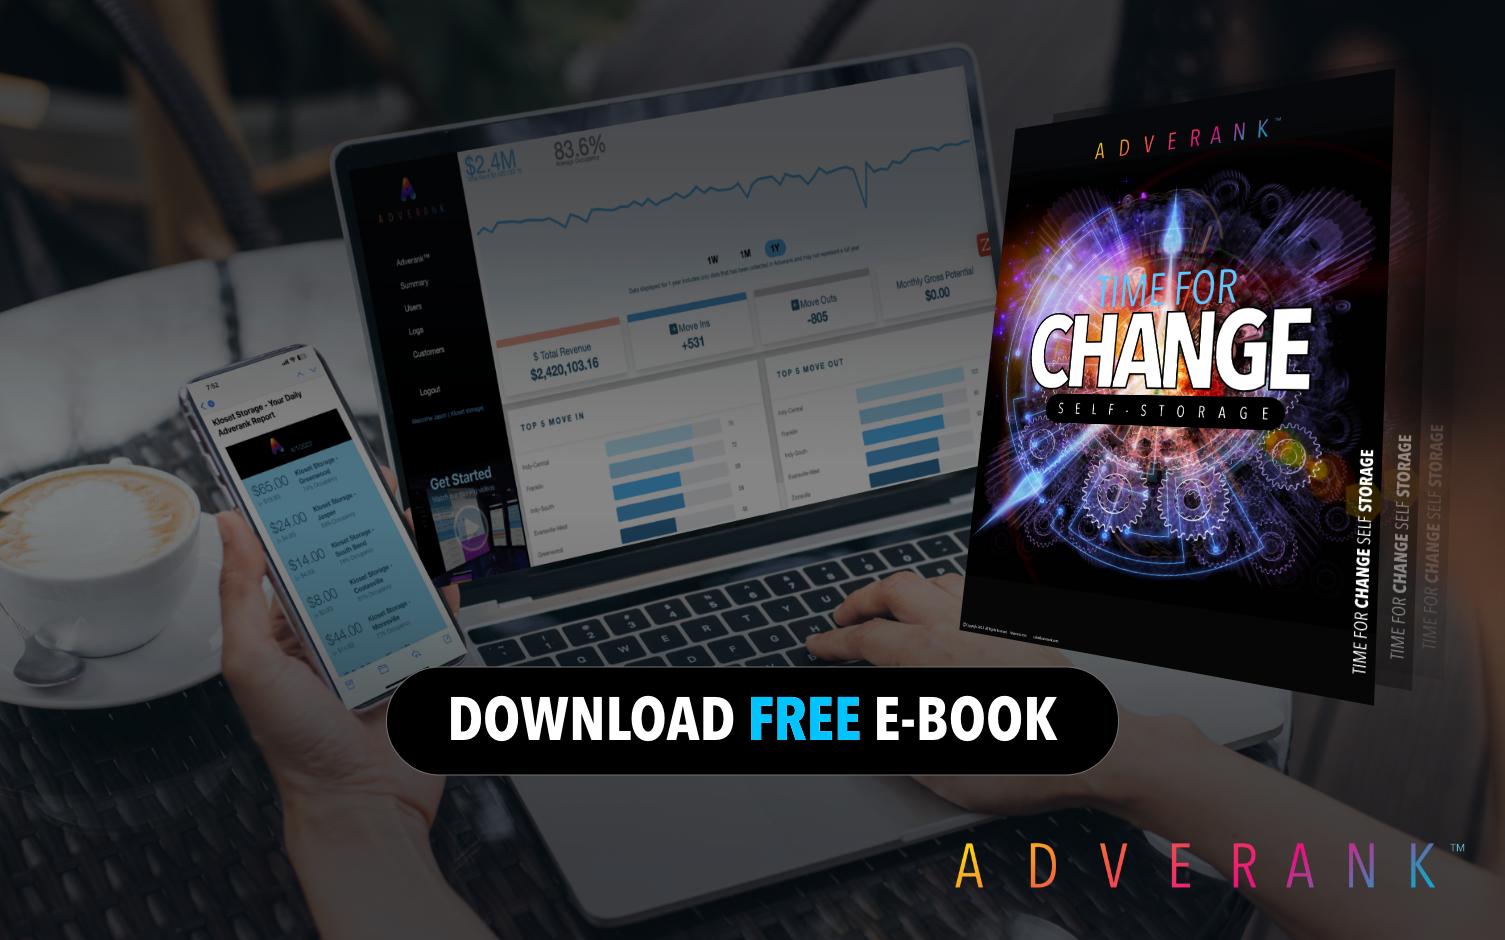 Time For Change E-Book